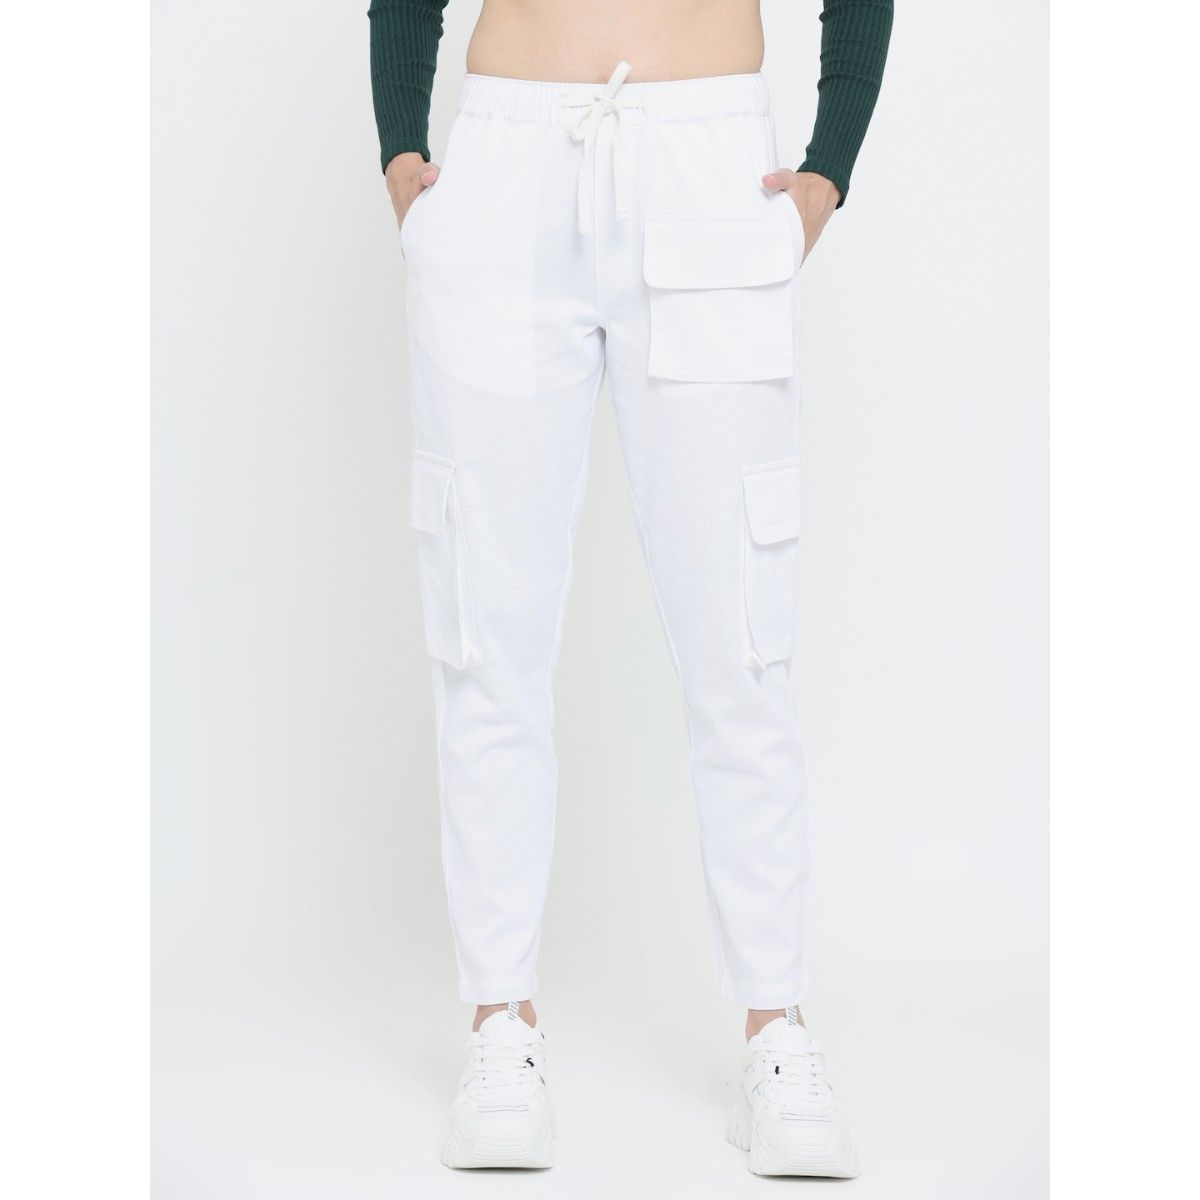 WHITE COTTON SOLID CARGO PANT  ROOKIES